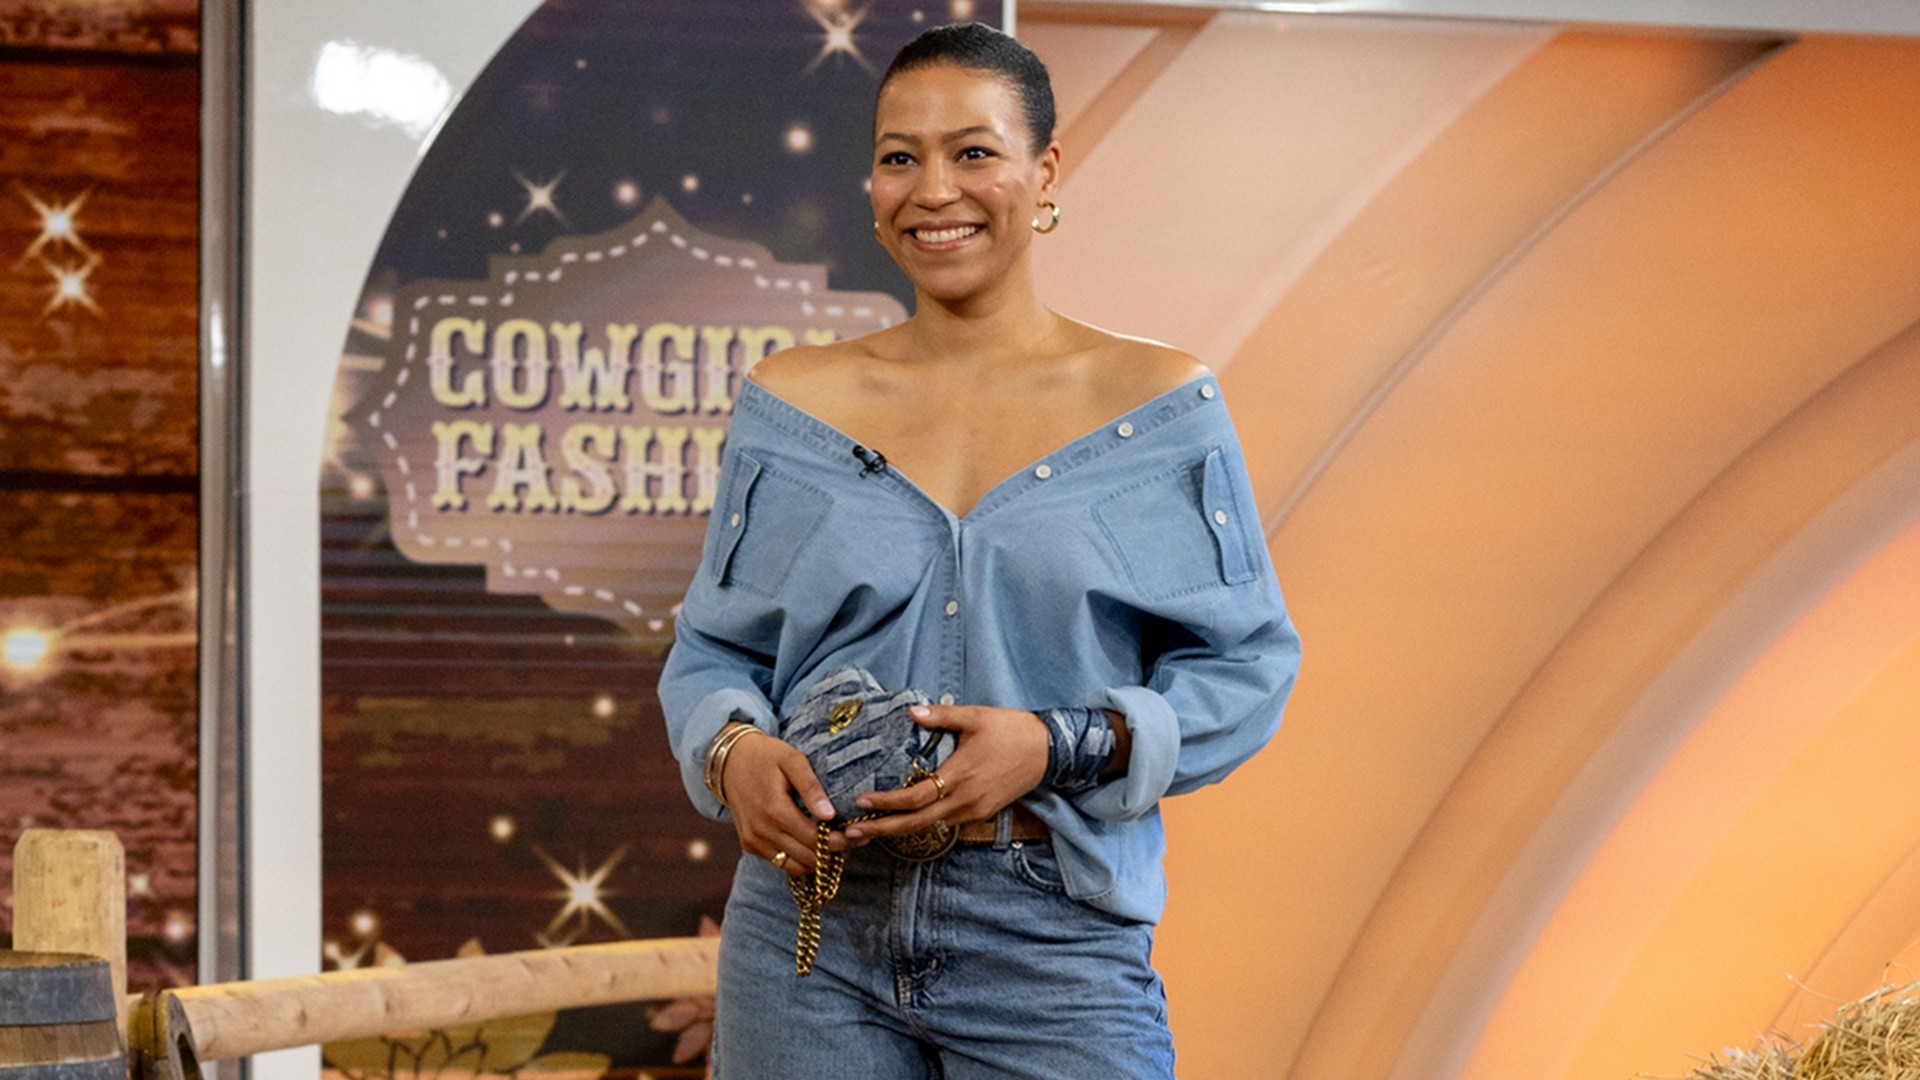 Shop cowgirl fashion items inspired by Beyoncé's 'Cowboy Carter'